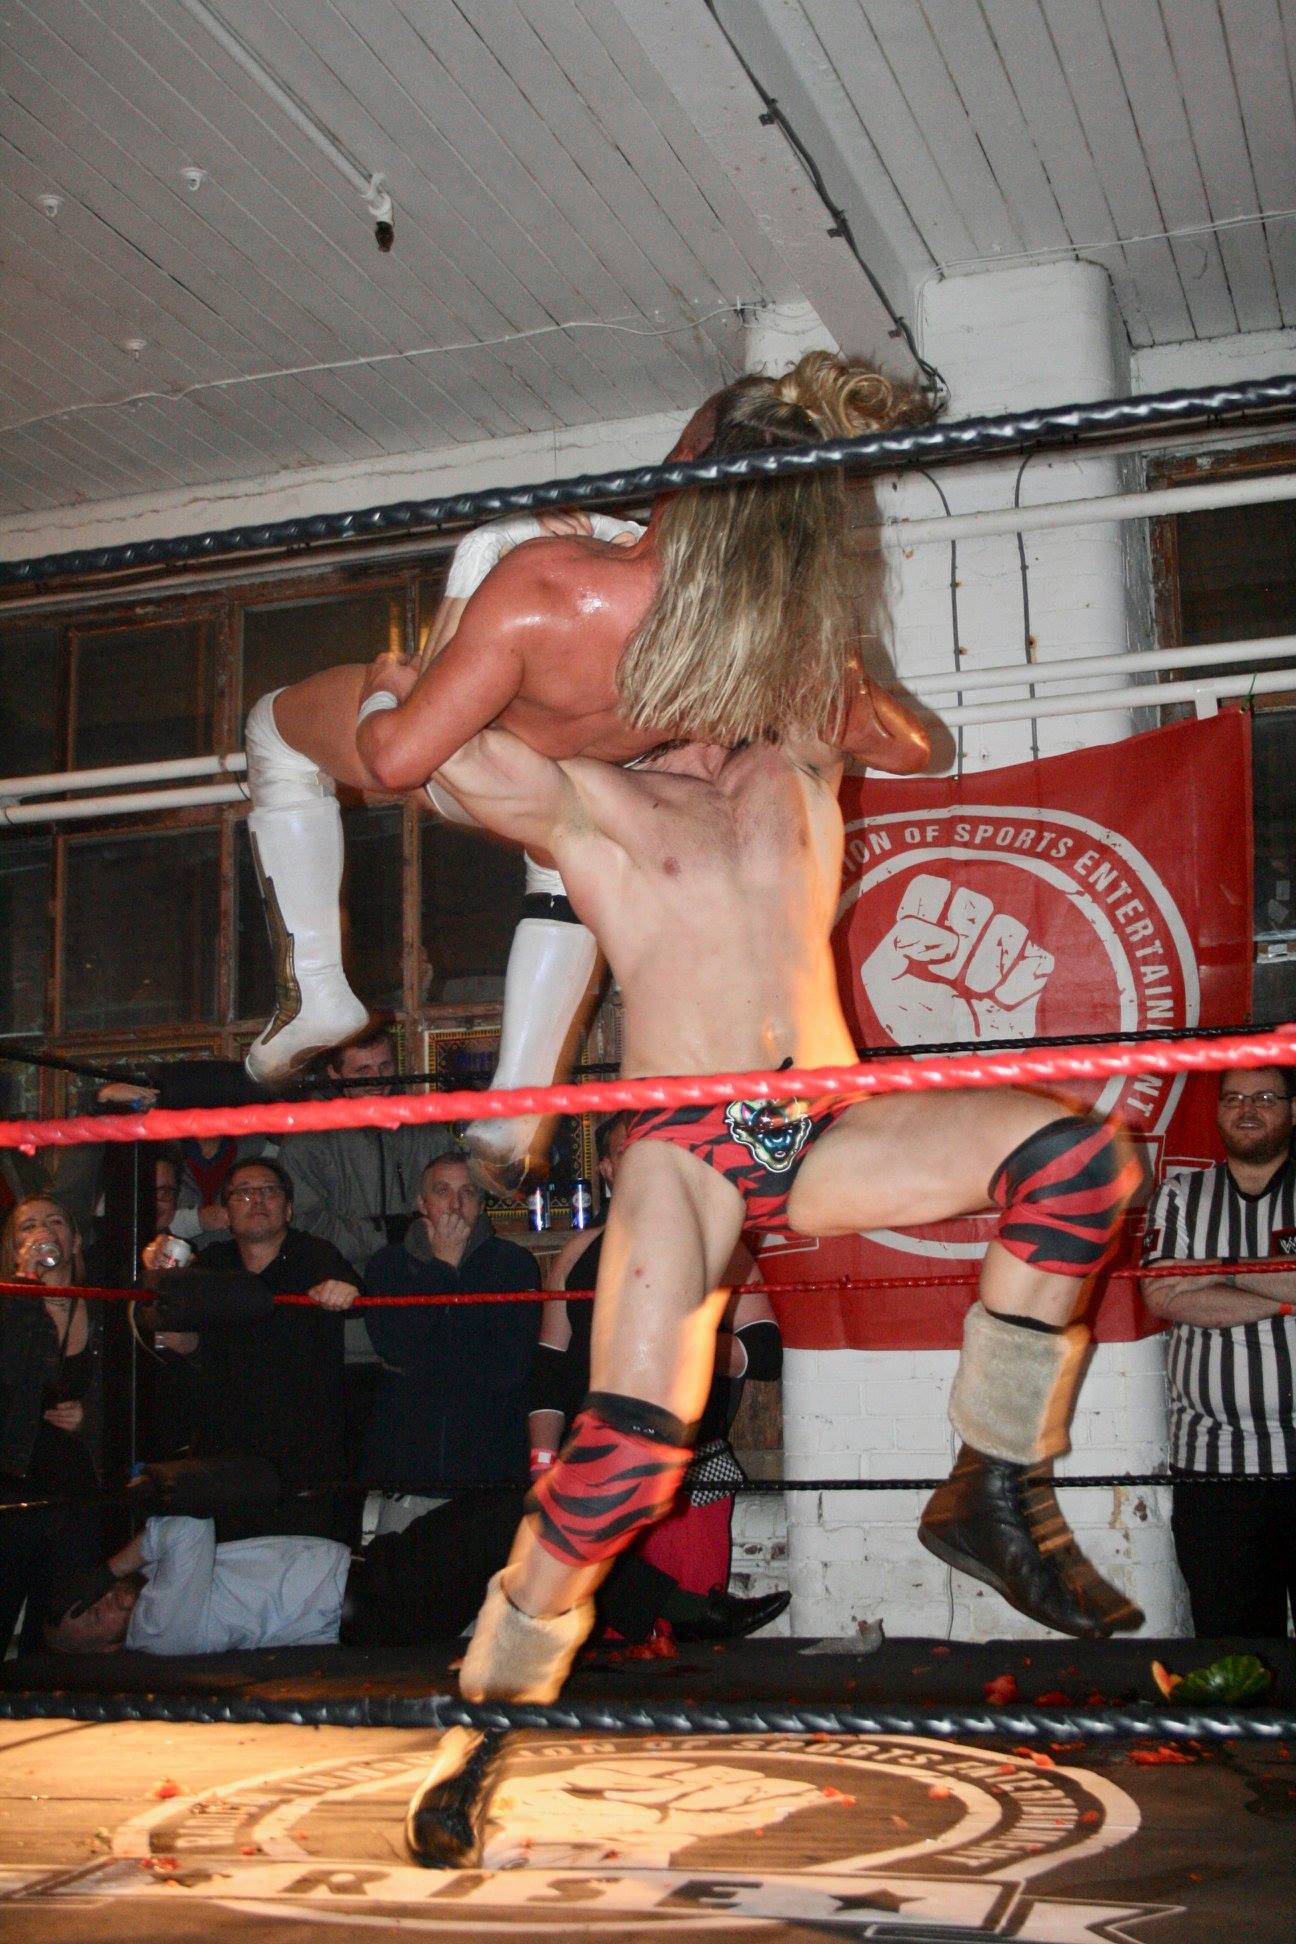 Action shot at rise underground pro wrestling showing a competitor throwing another competitor through the air